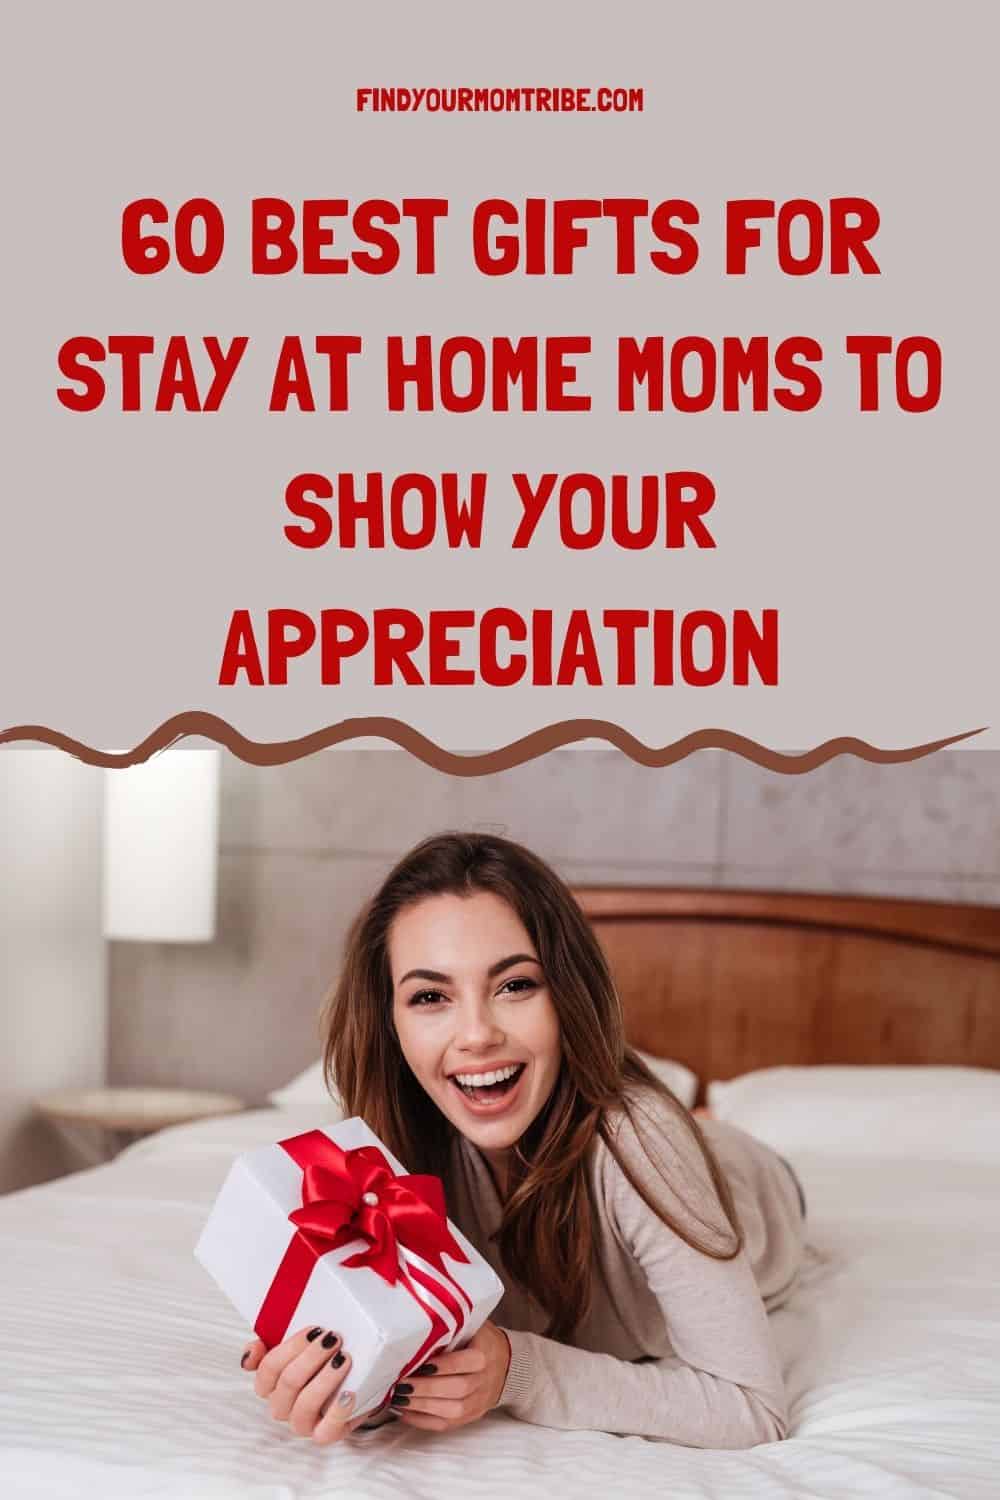  Pinterest gifts for stay at home moms